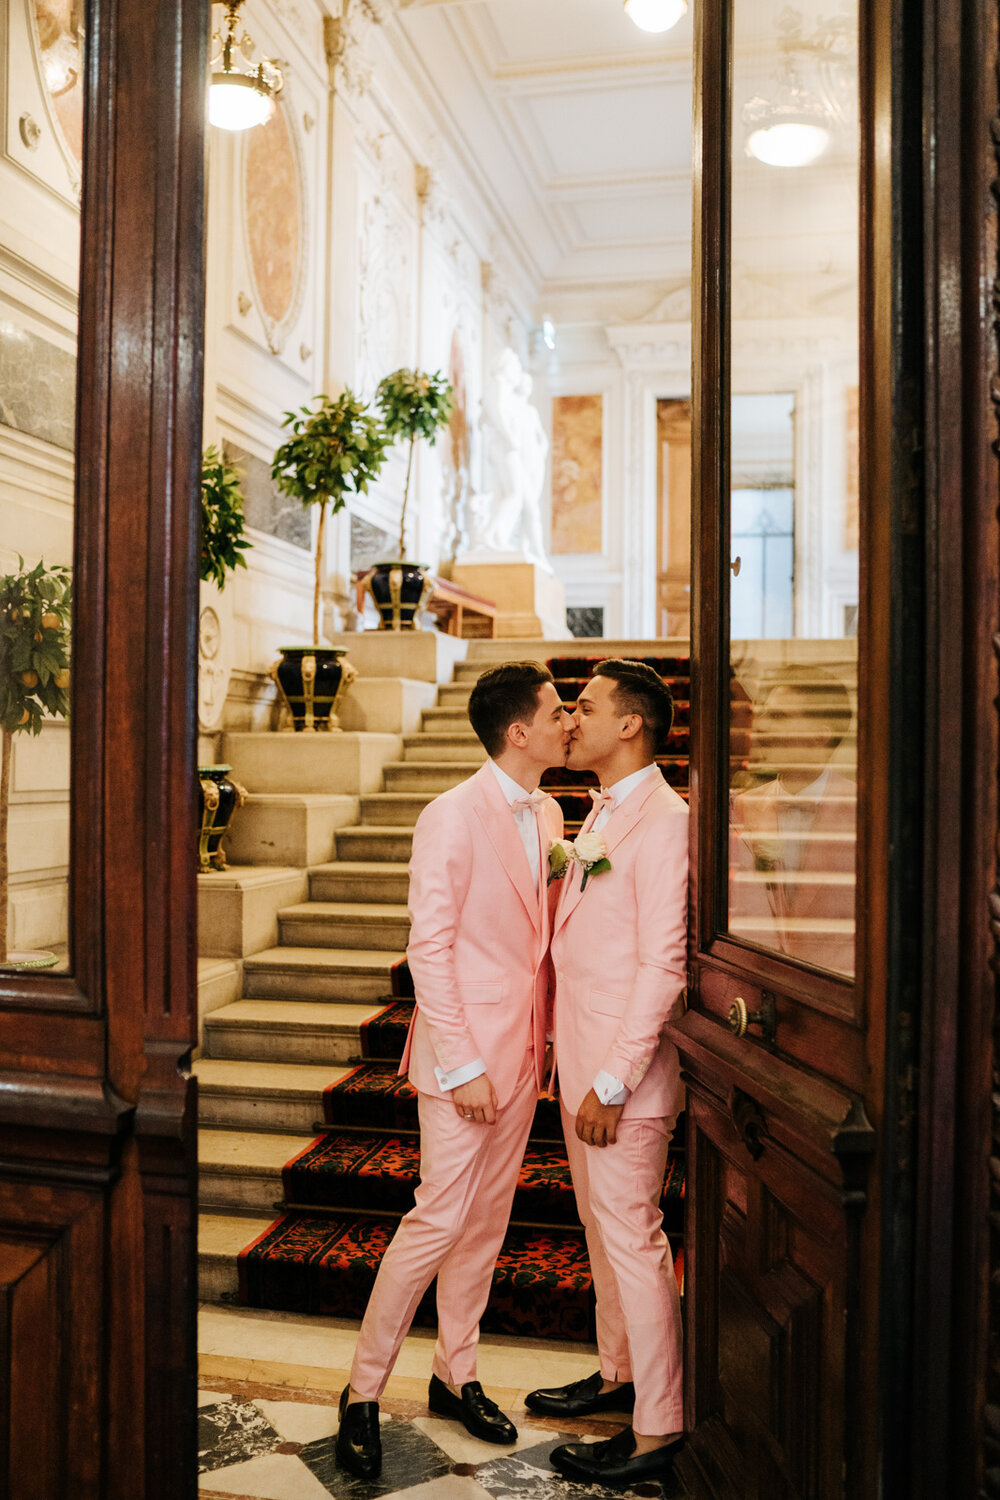  Both grooms kiss inside doorway at Paris courthouse 